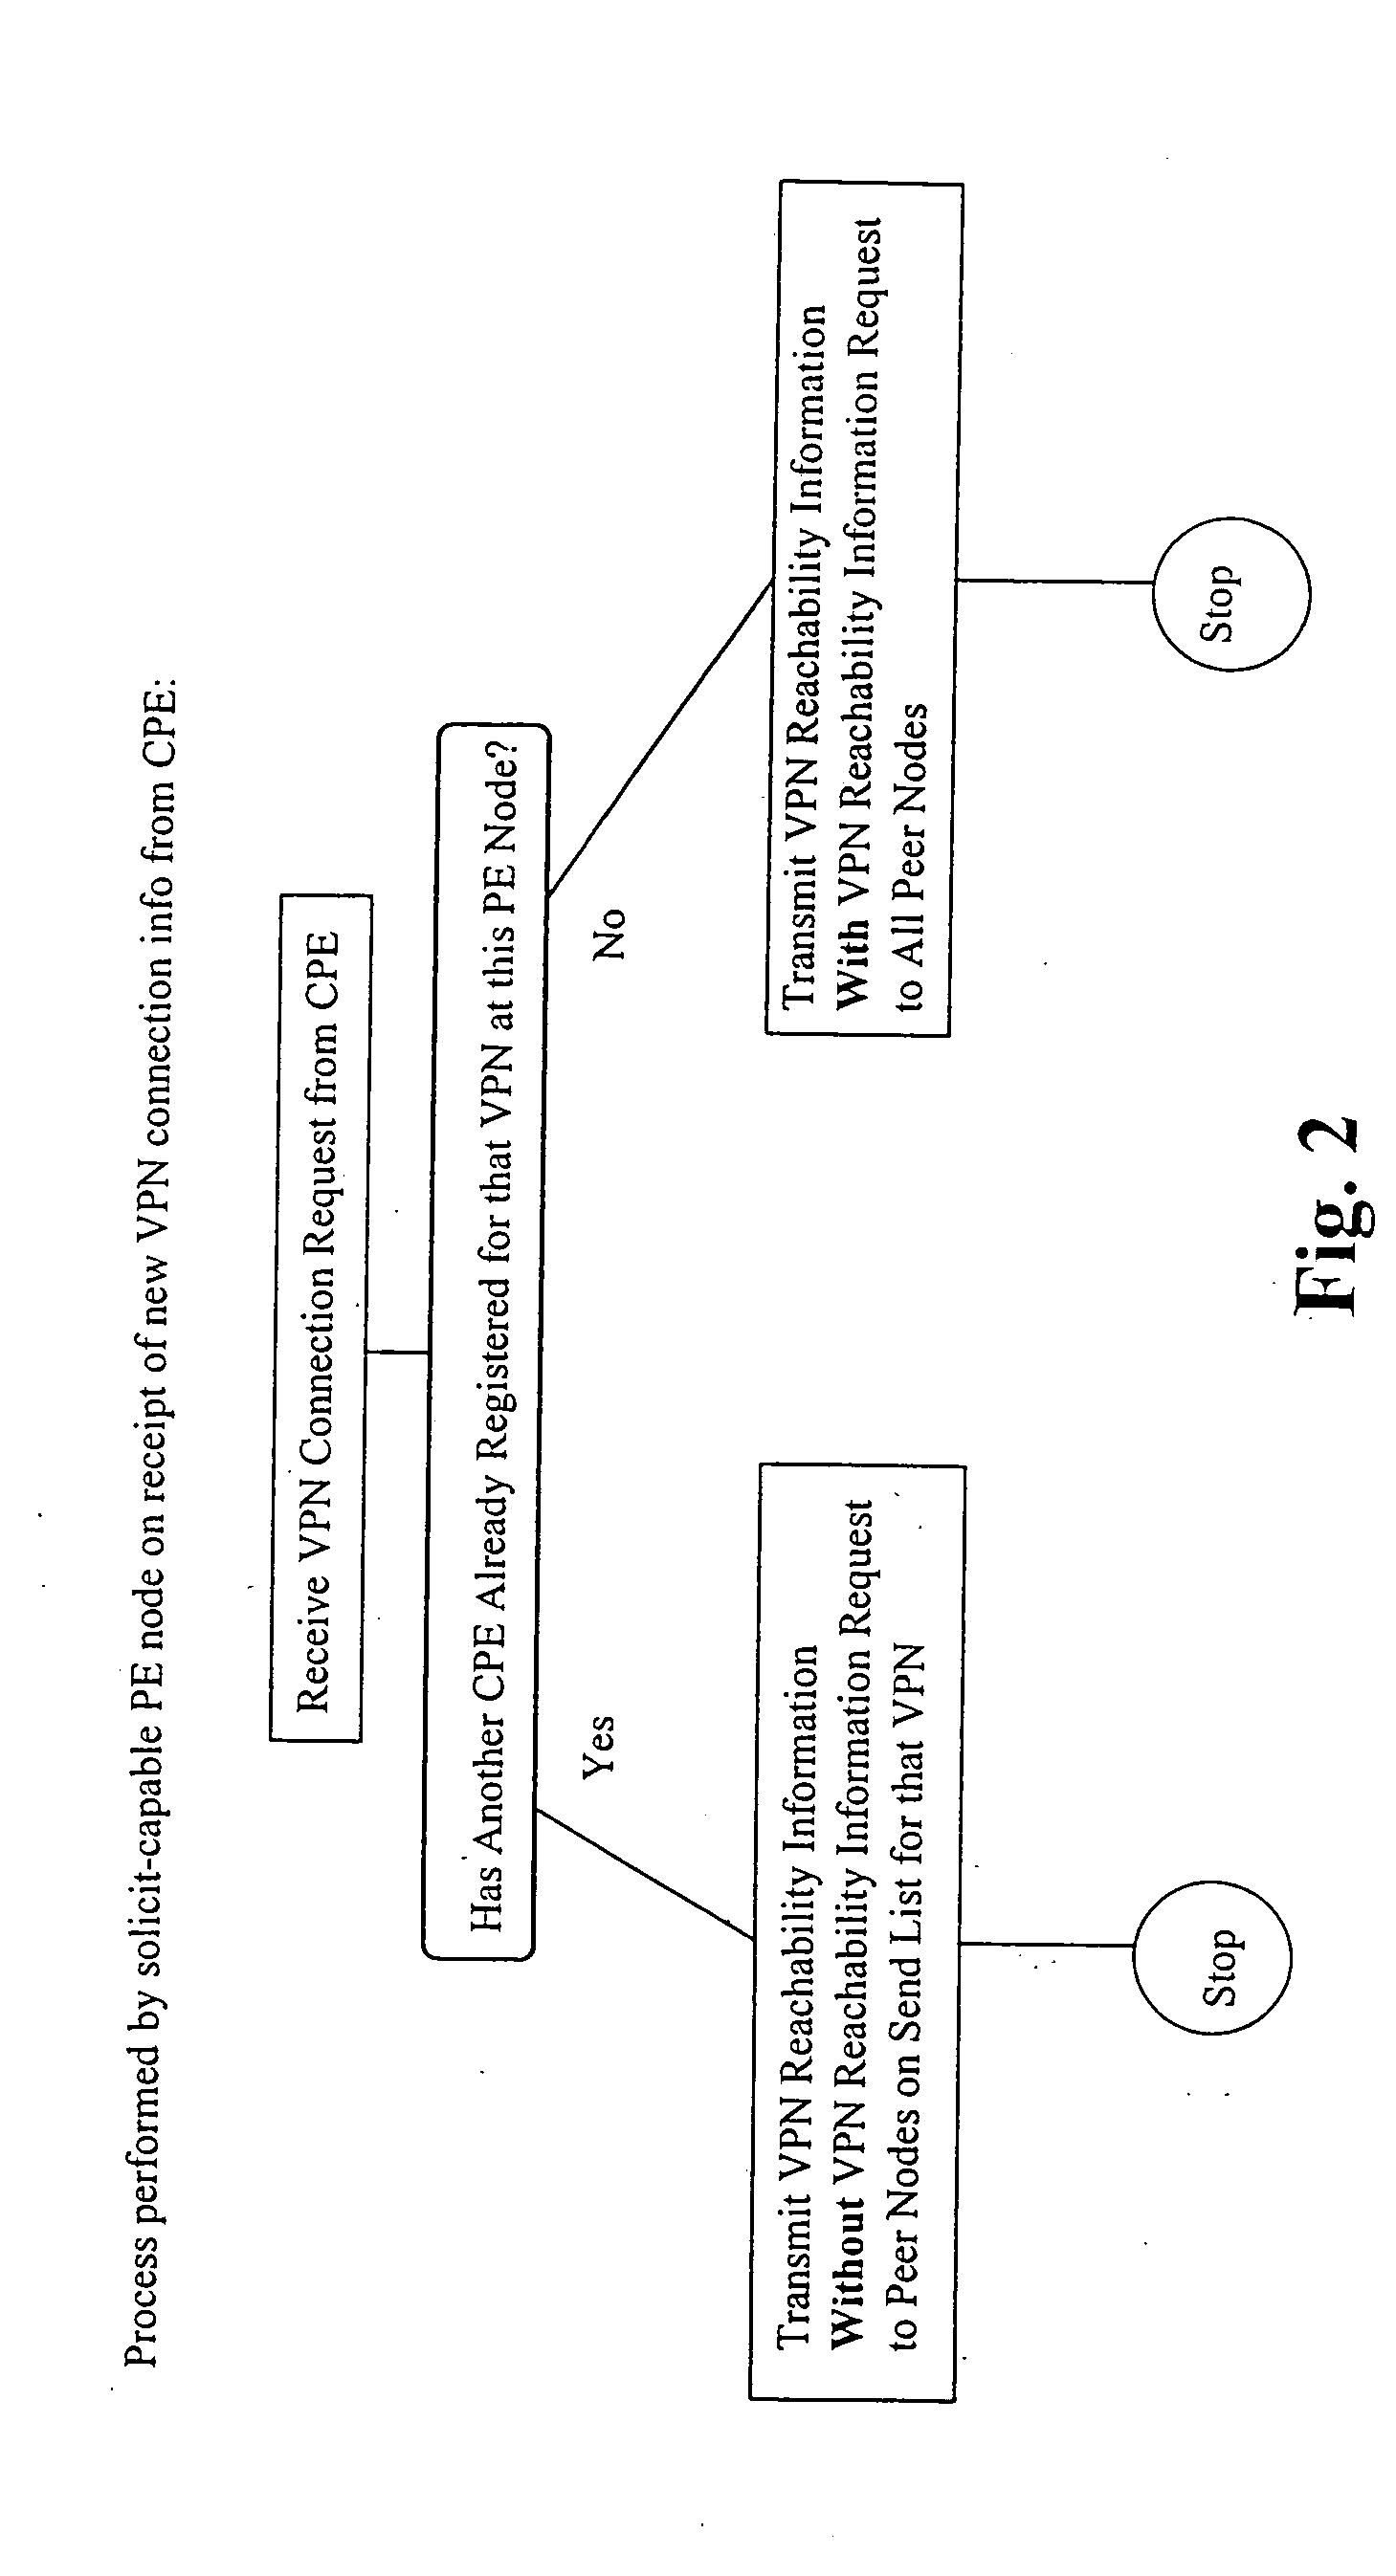 Distribution of reachability information in data virtual private networks